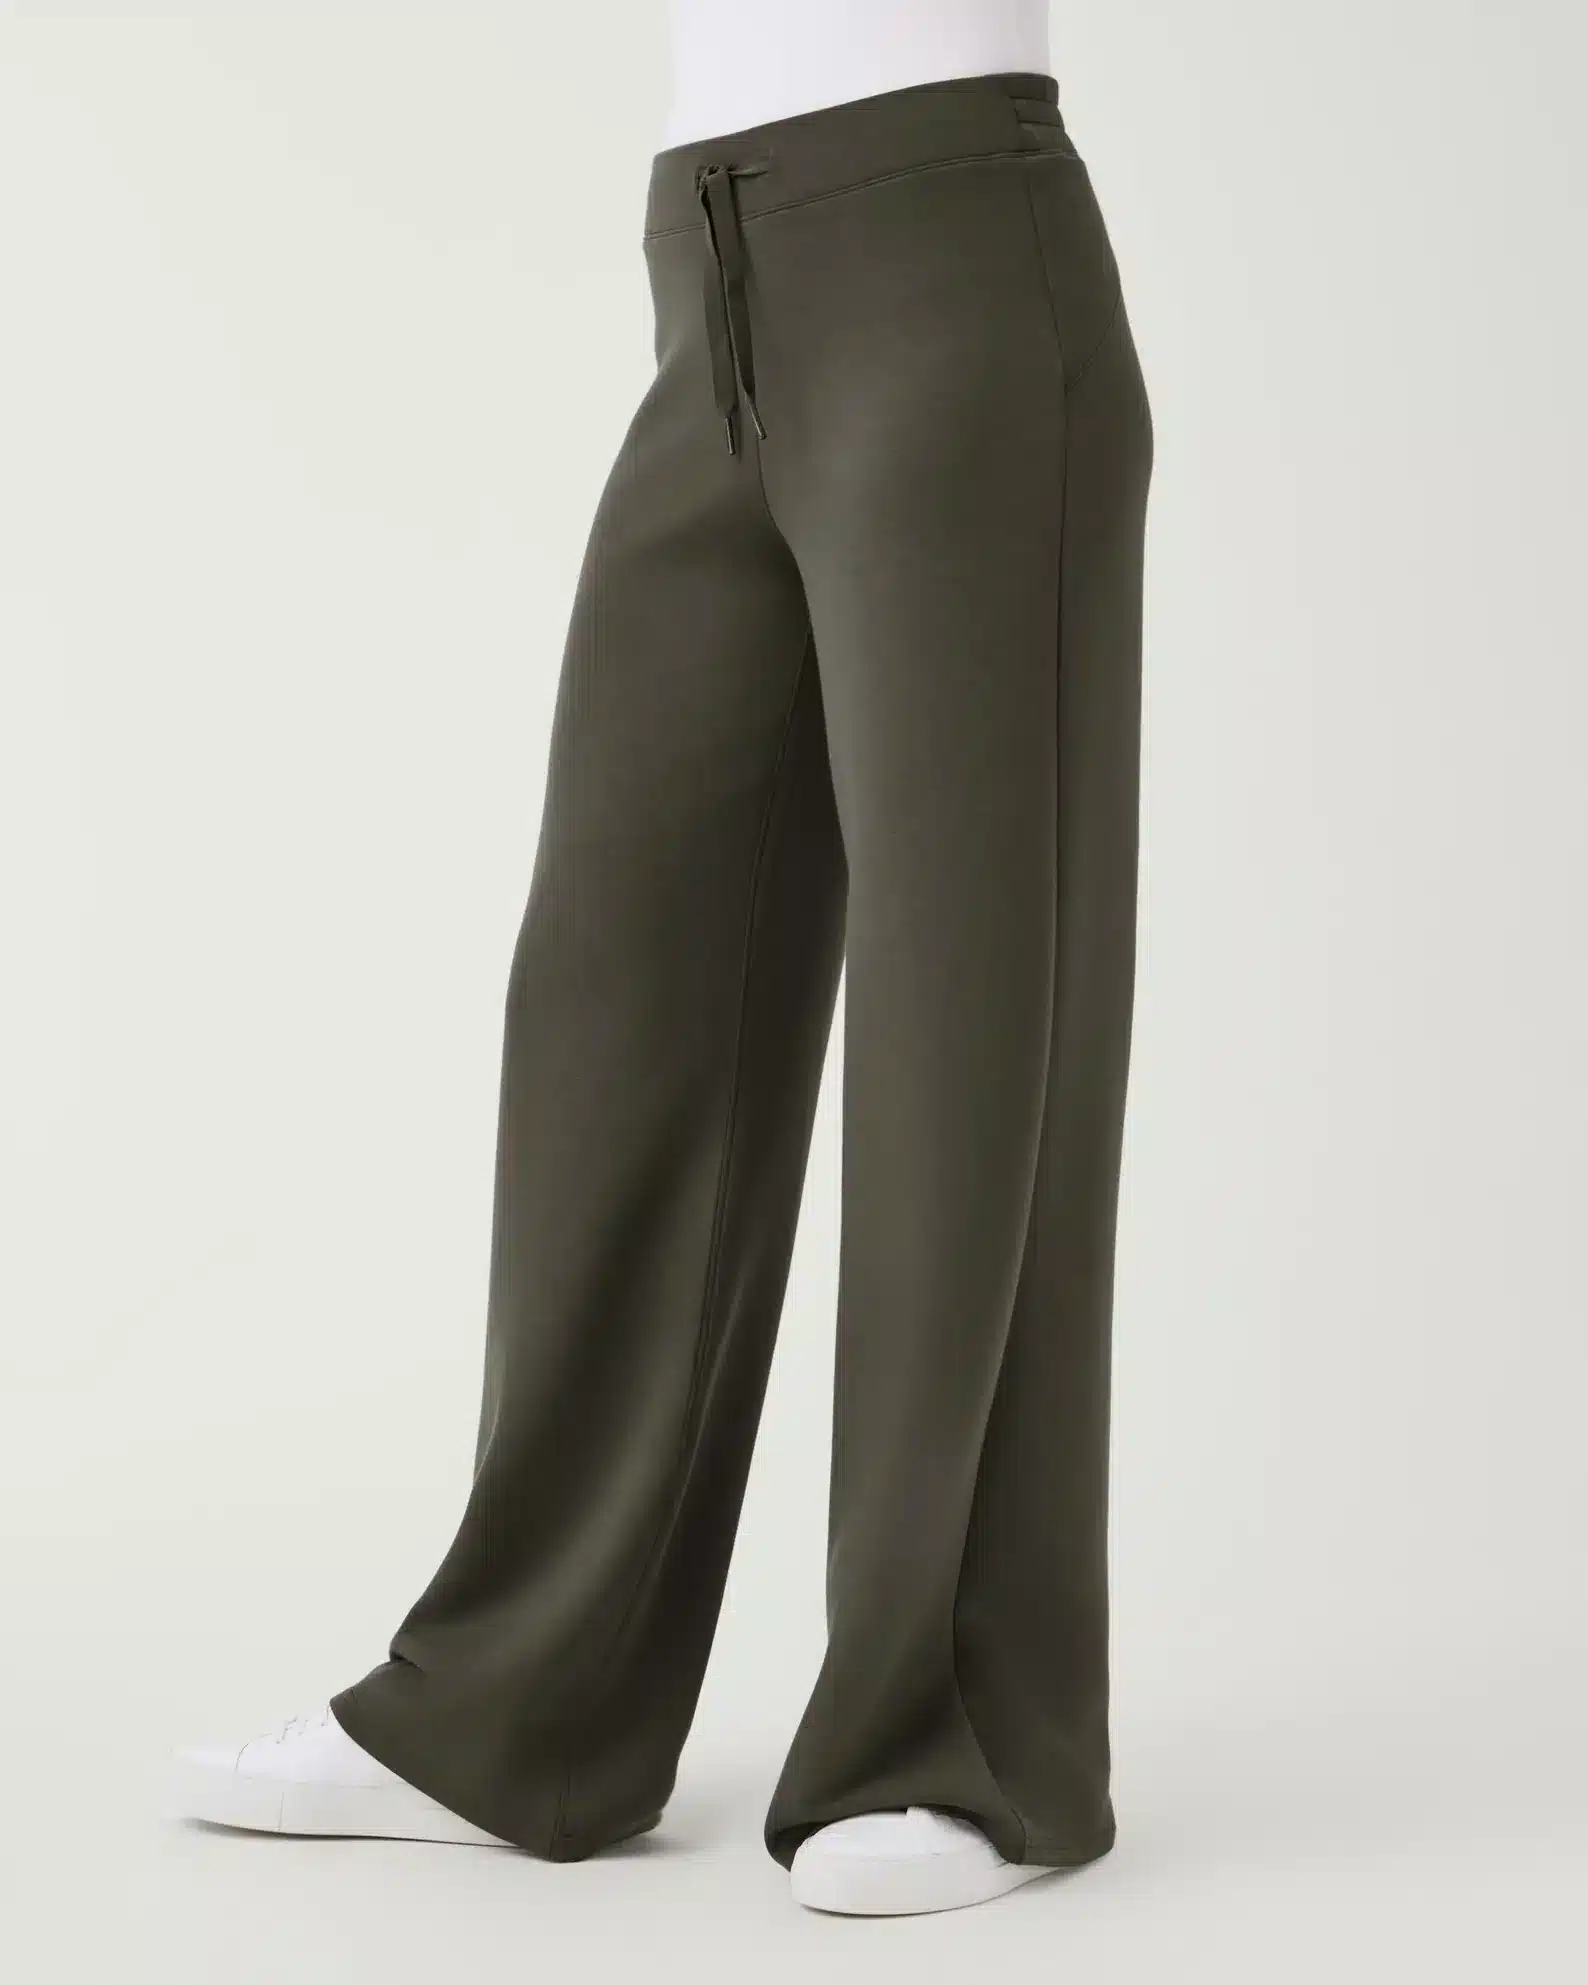 Air Essentials Wide Leg Pant by Spanx in Olive Green that give you an sophisticated look without spending a million bucks.